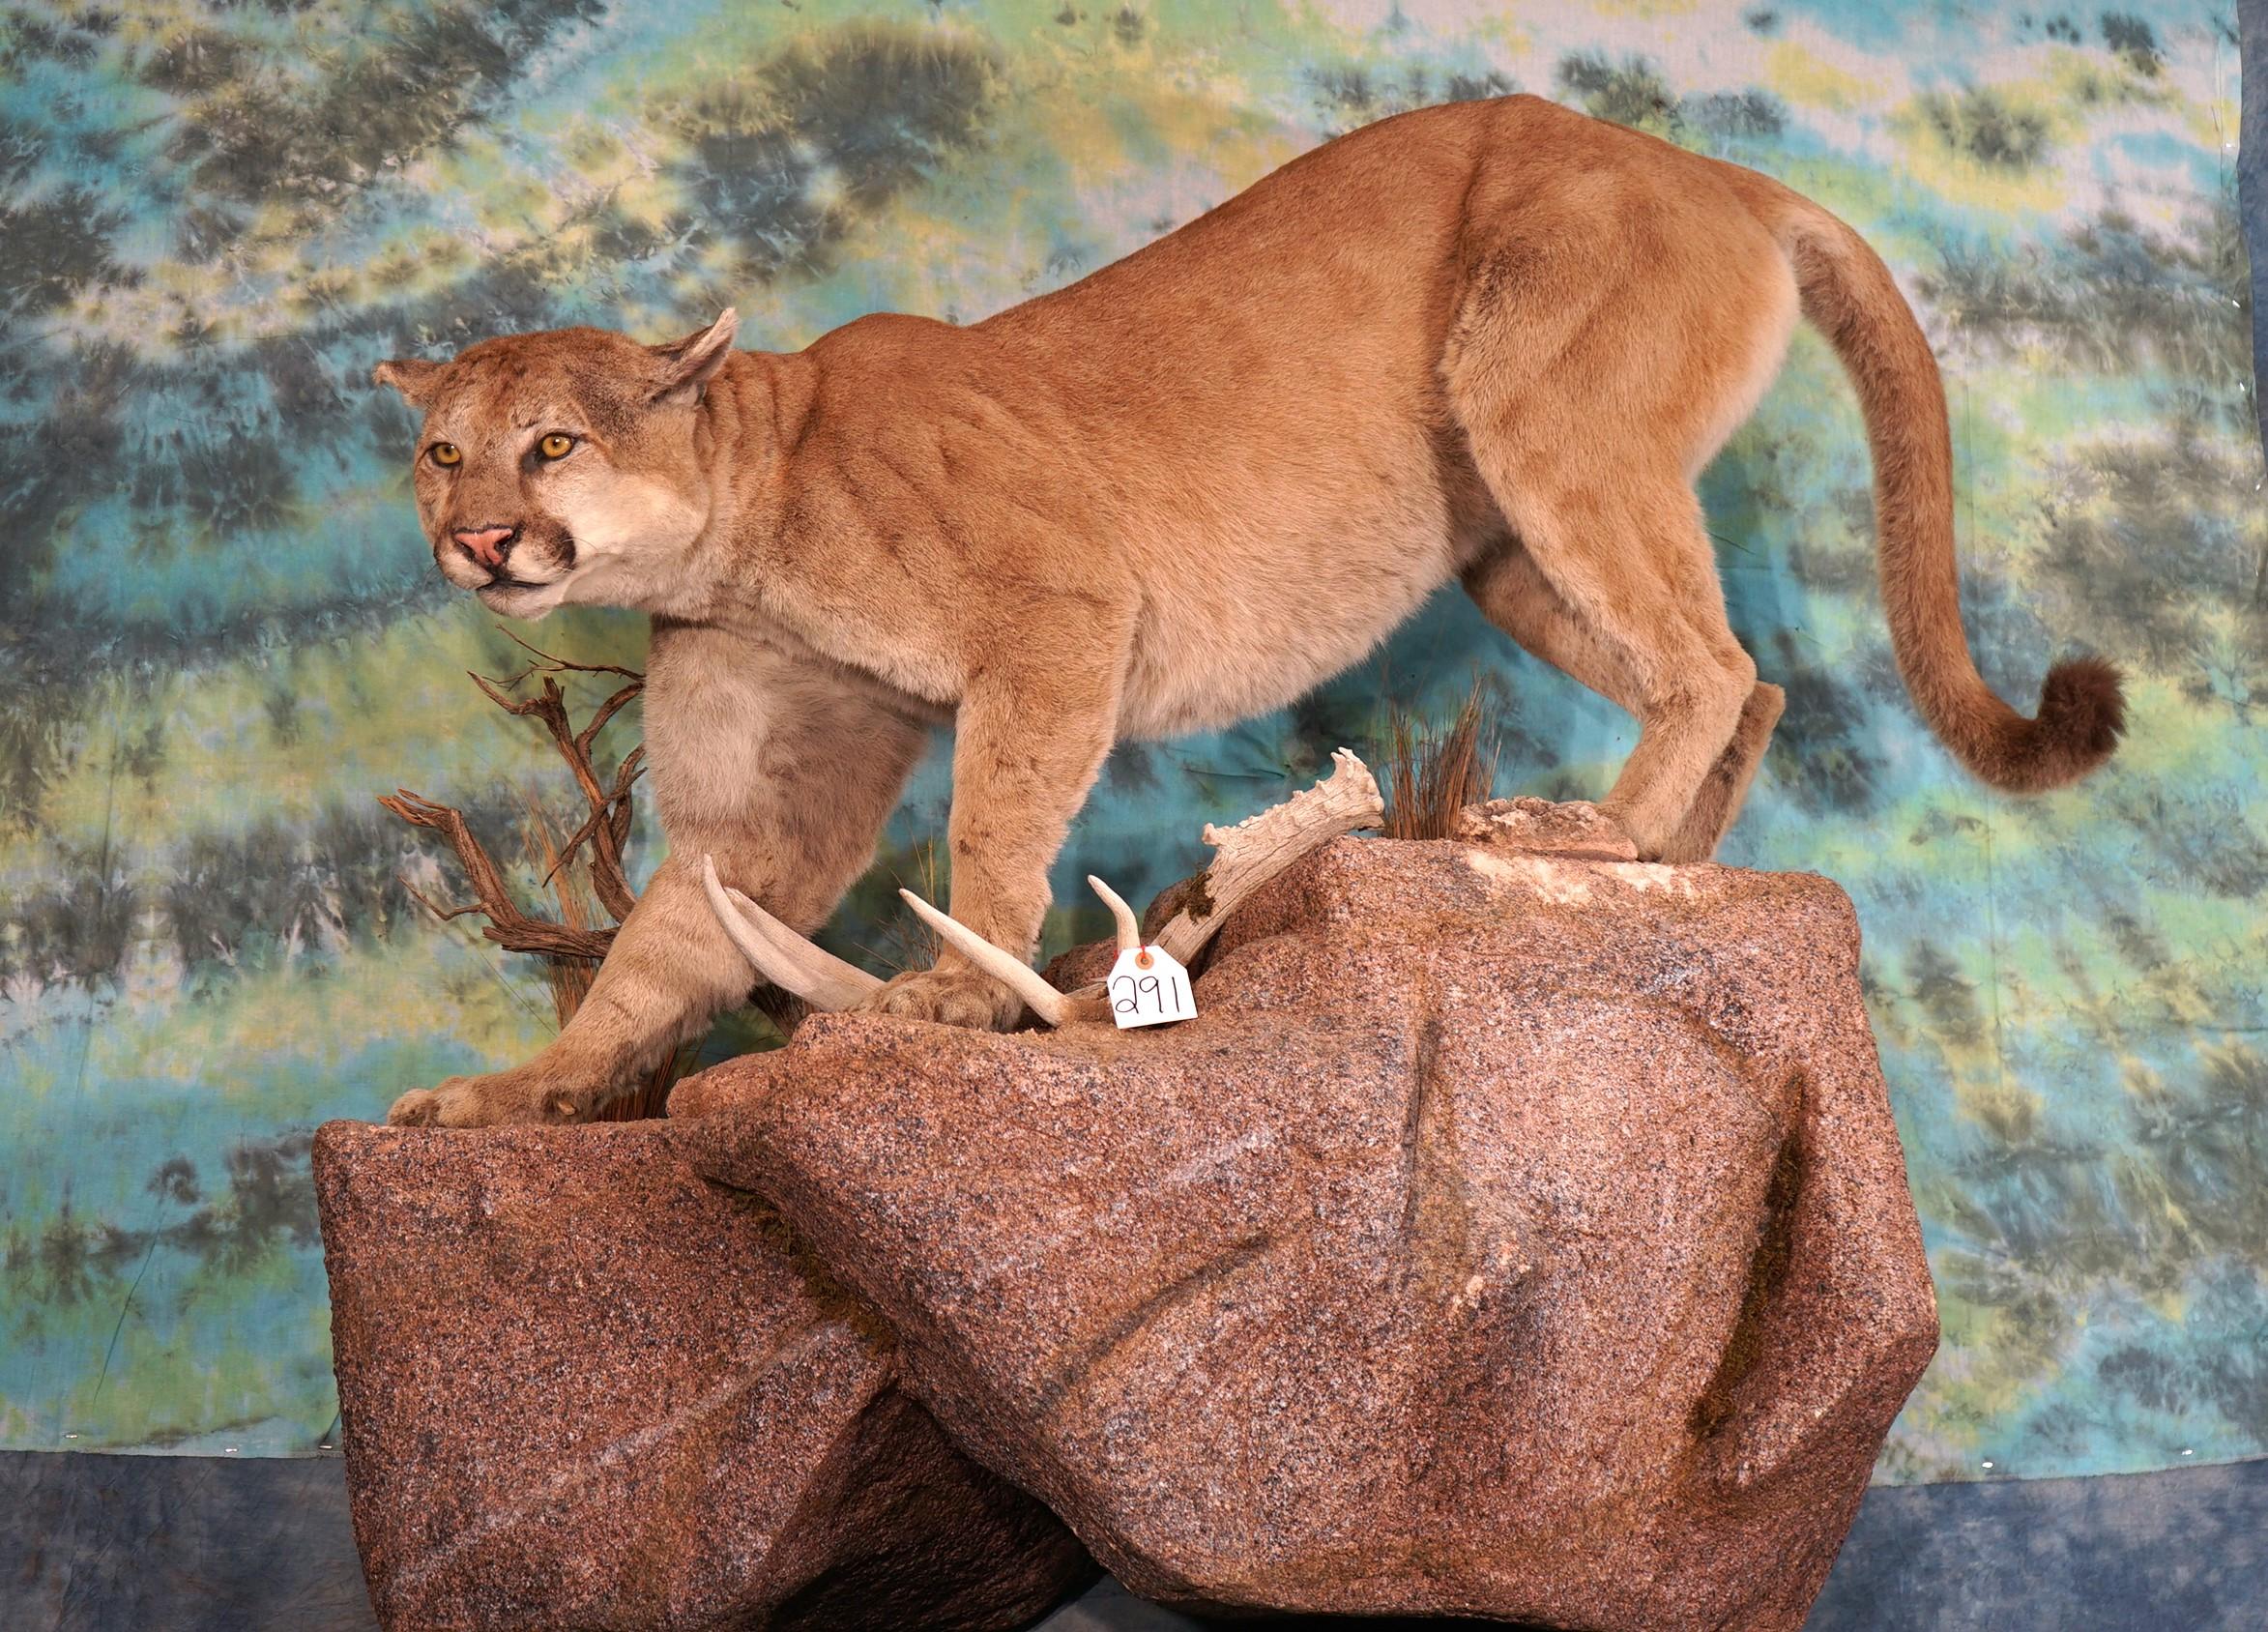 Awesome Full Body Mountain Lion Taxidermy Mount